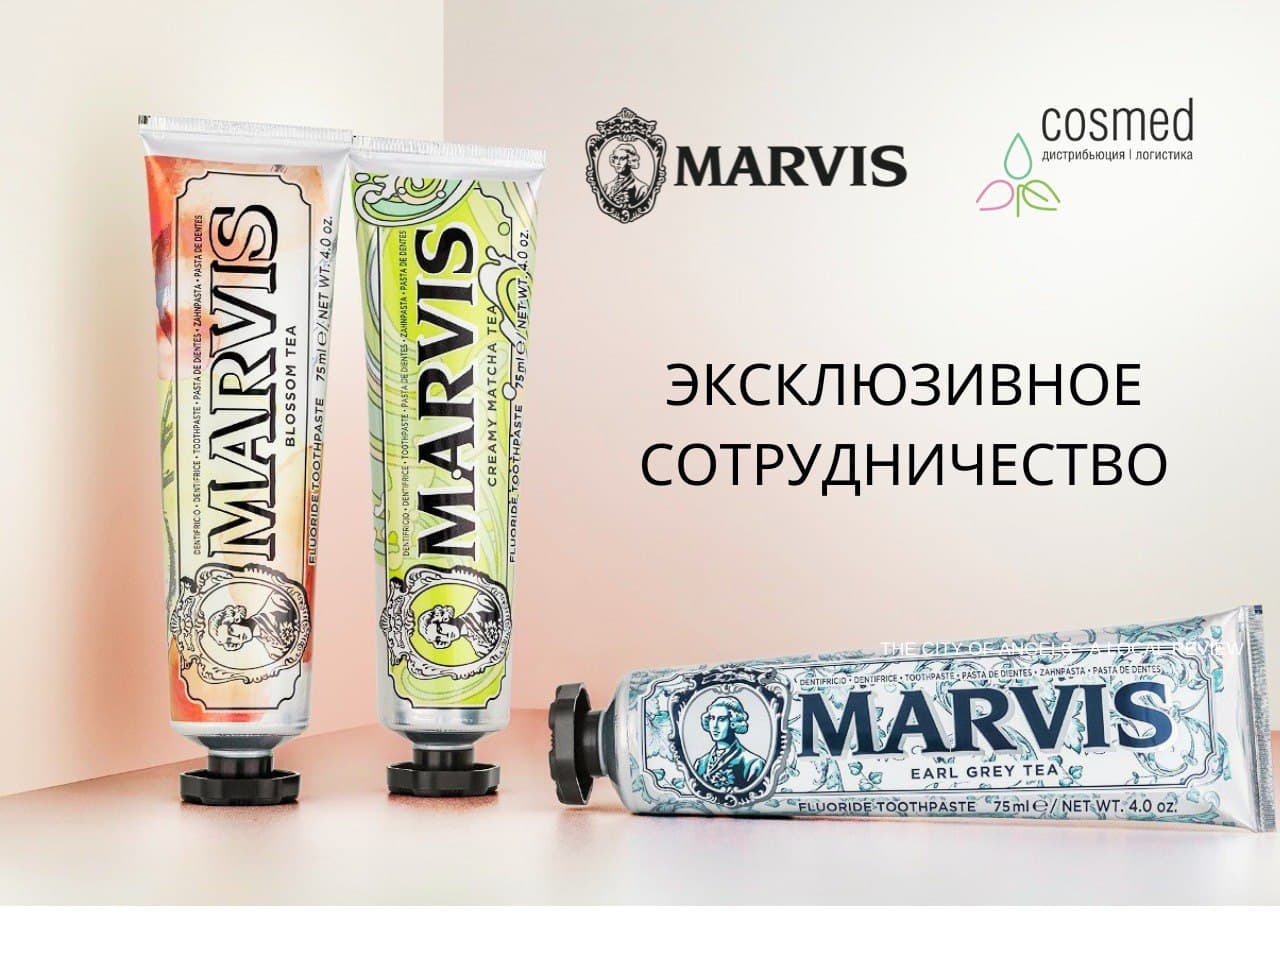 Since December 2021, the company has become the exclusive distributor of the Marvis brand in Ukraine.